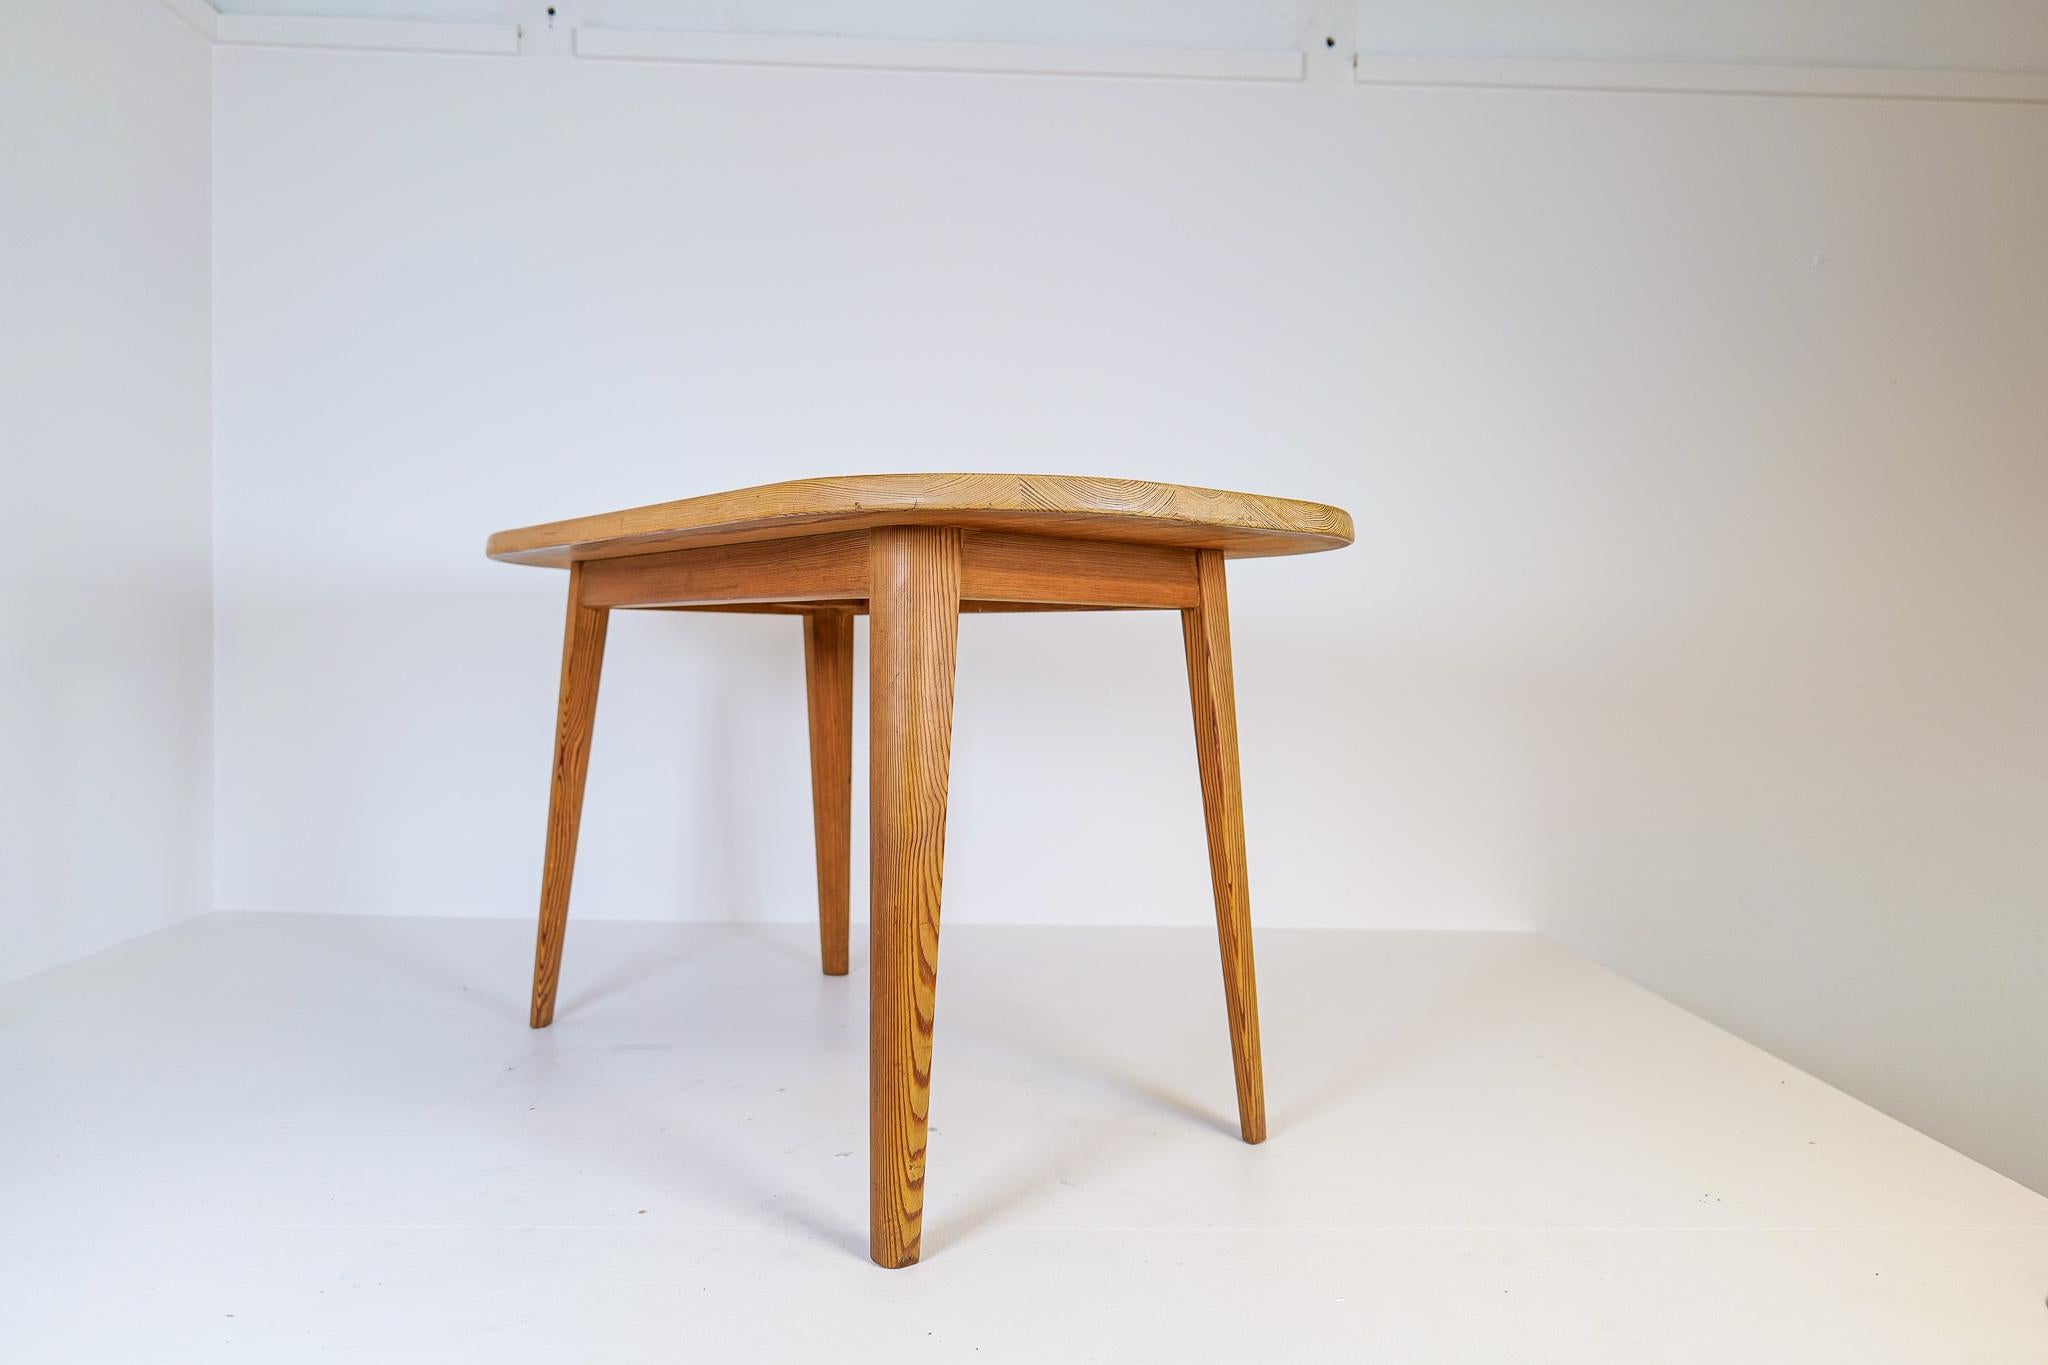 Midcentury Pine Coffee Table by Carl Malmsten, Sweden, 1940s For Sale 4